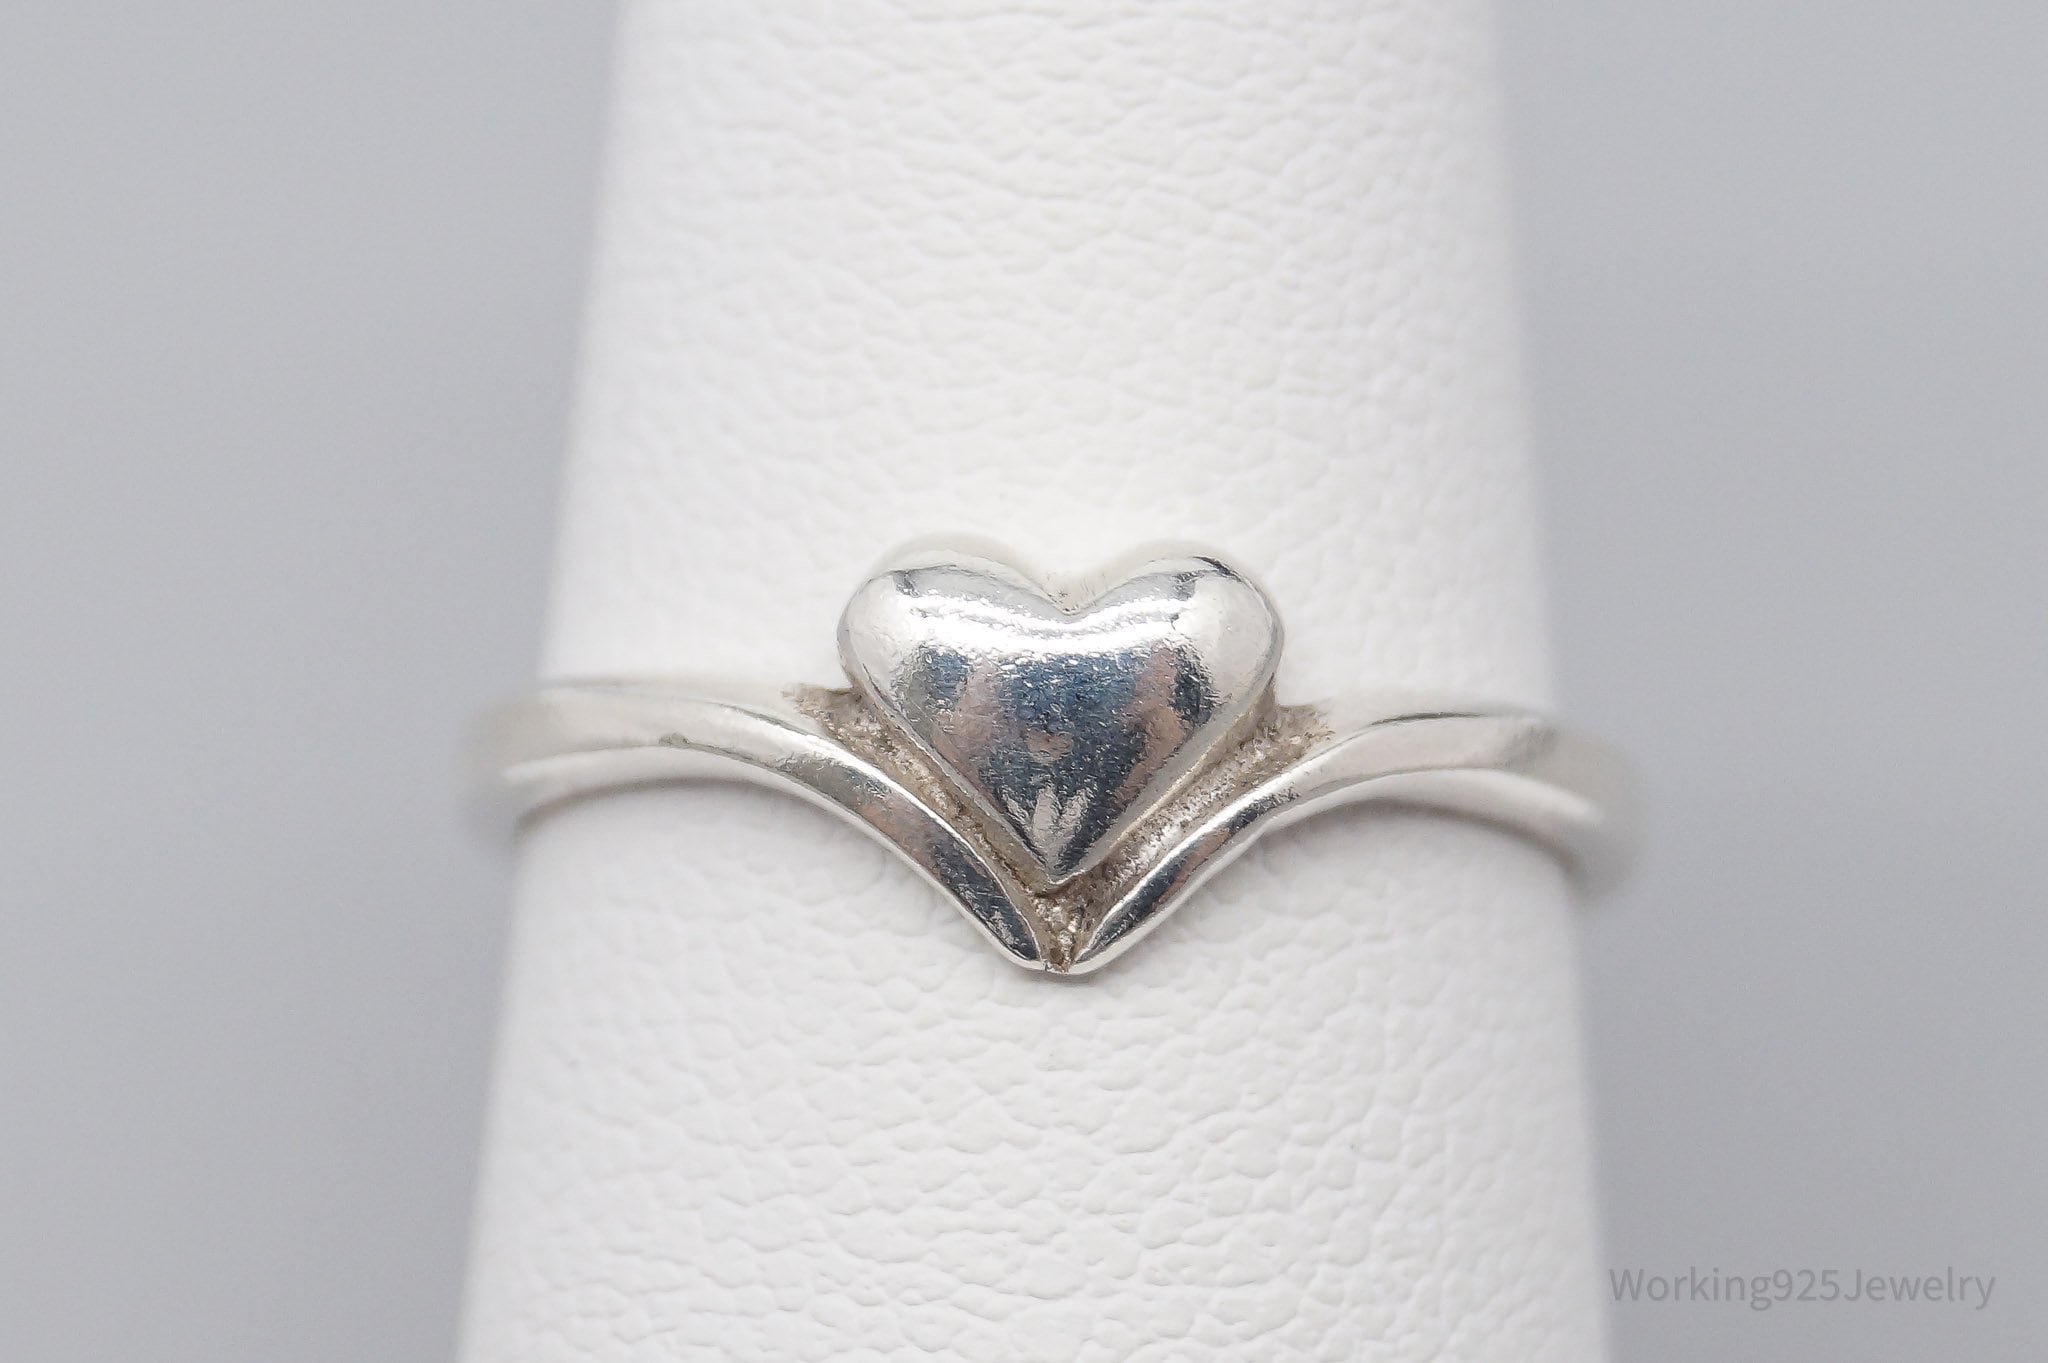 Vintage Puffy Heart Sterling Silver Ring - Size 5.5